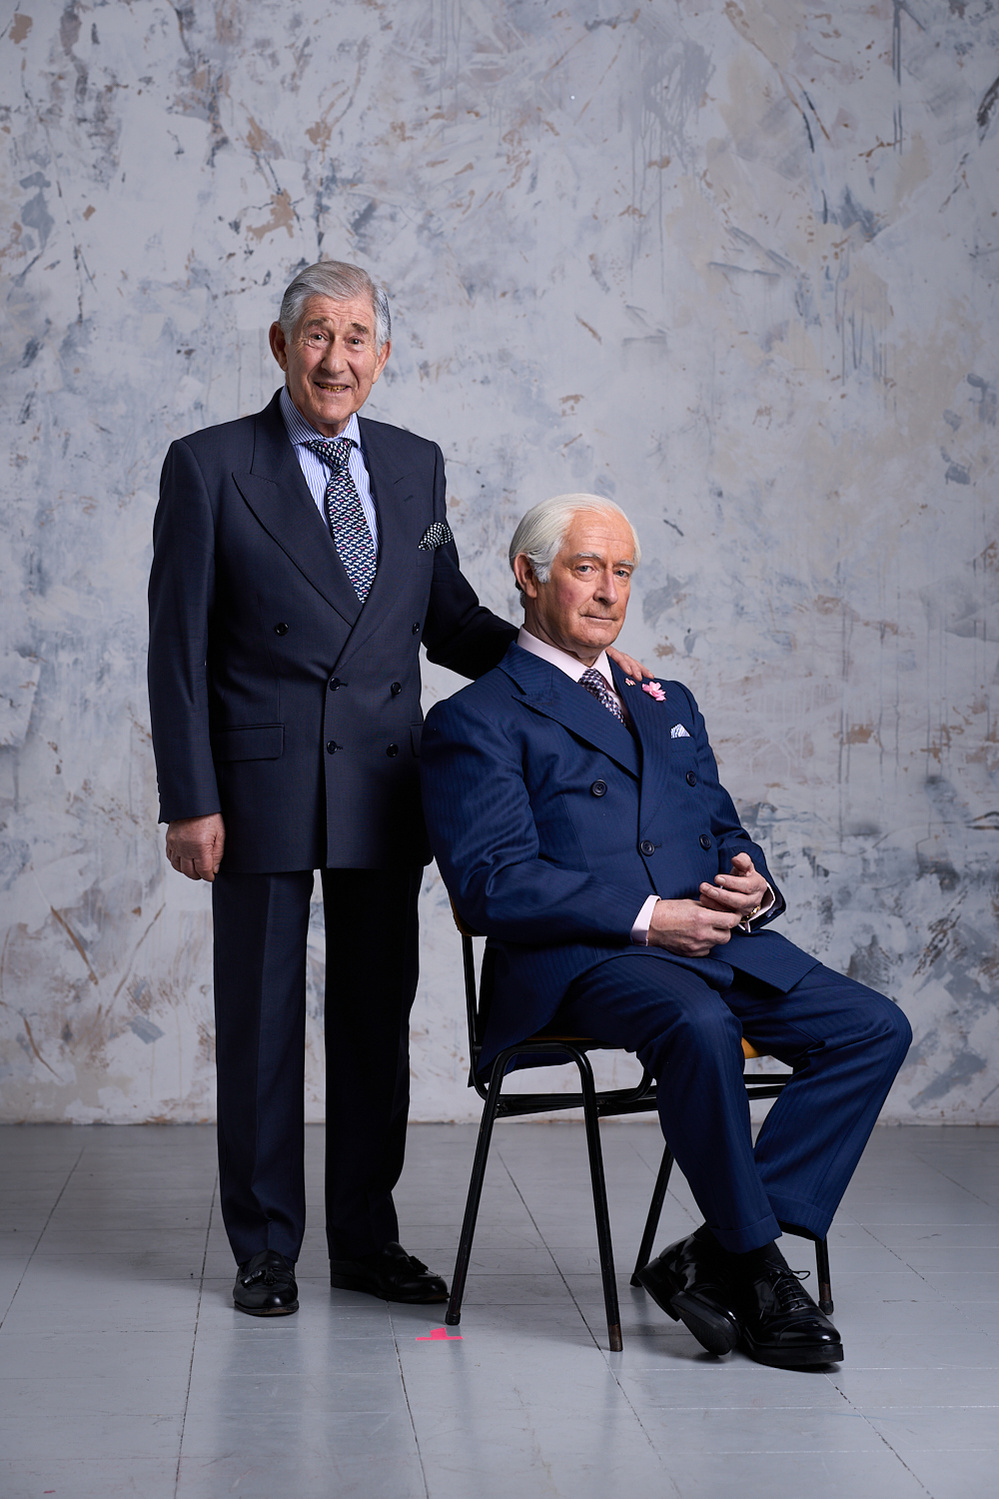 King Charles Impersonators, Ian Lieber, left, and Charles Haslett, for The New York Times [Cover Story 29.03.23 PRINT + ONLINE]

“For Impersonators of a Prince, It’s Good to Finally be The King” - Photography Hayley Benoit